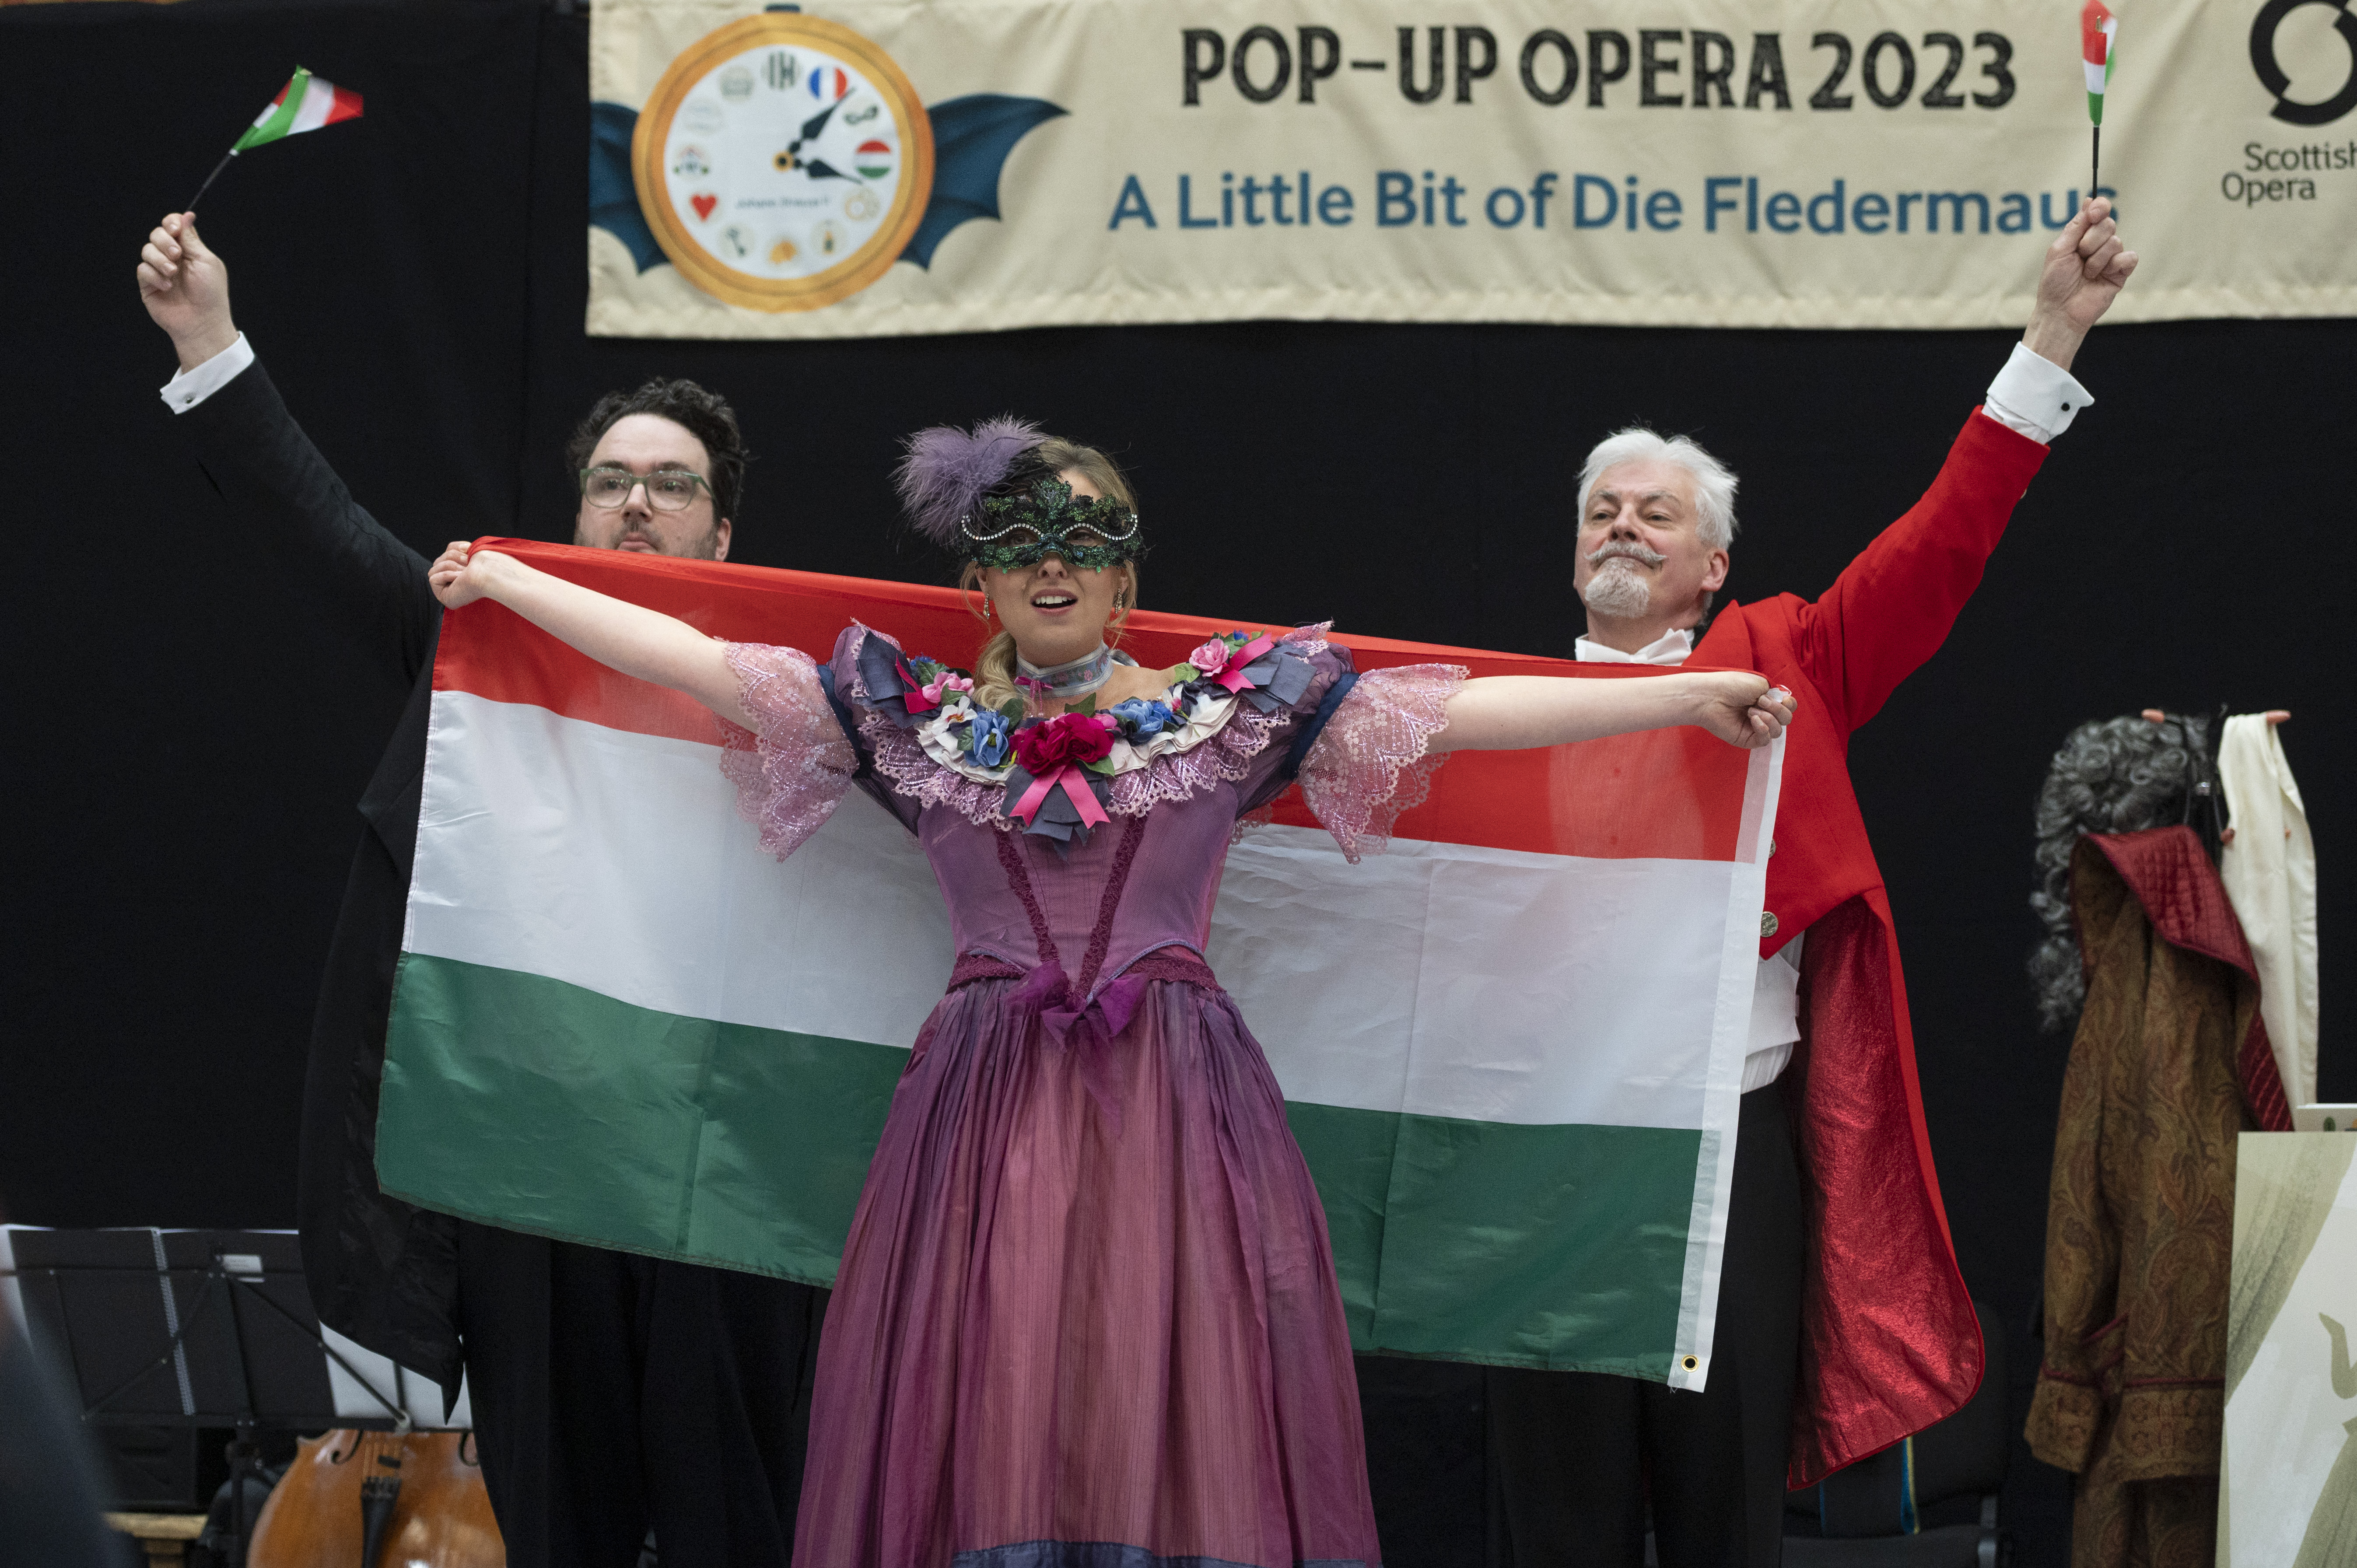 Andrew McTaggart, Jessica Leary and Allan Dunn in the Pop-up Opera performance of Die Fledermaus. Credit Kirsty Anderson..JPG